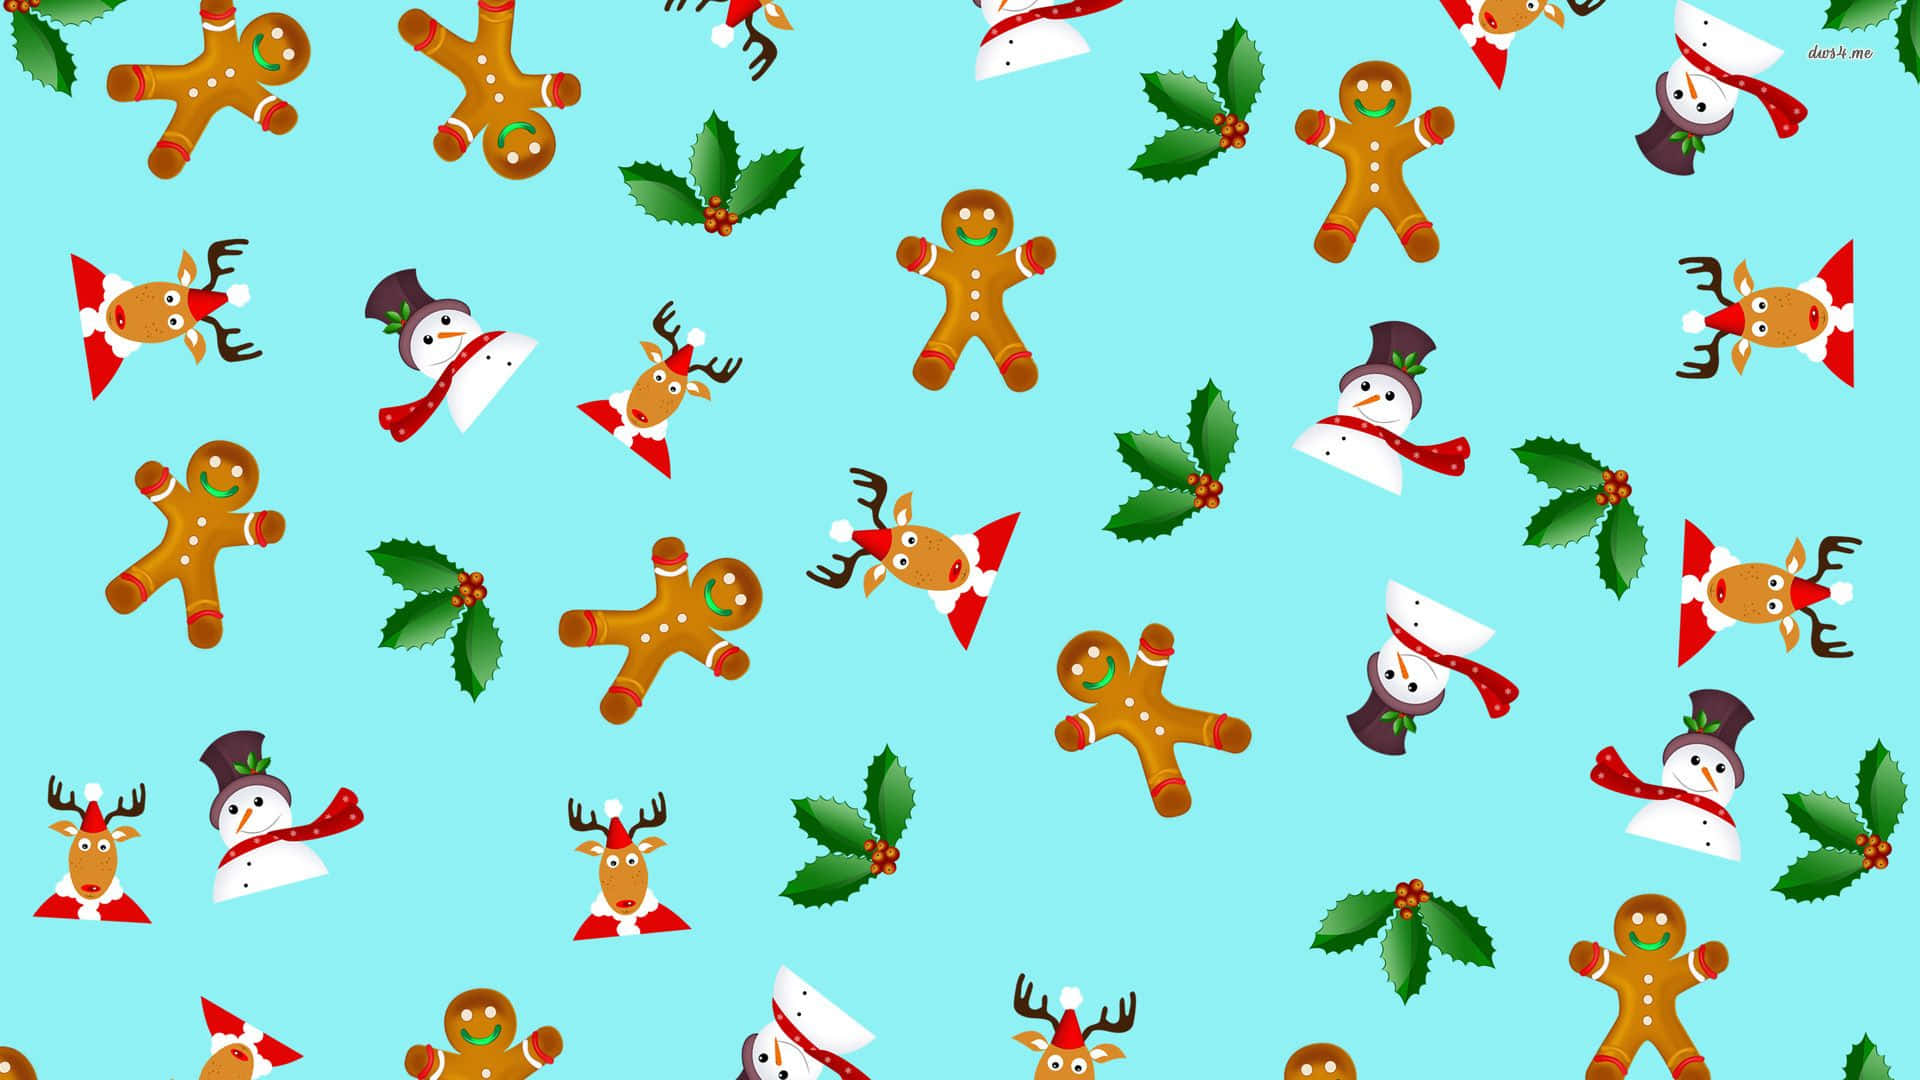 Have a Very Happy and Festive Christmas with this Awesome Christmas Pattern Wallpaper